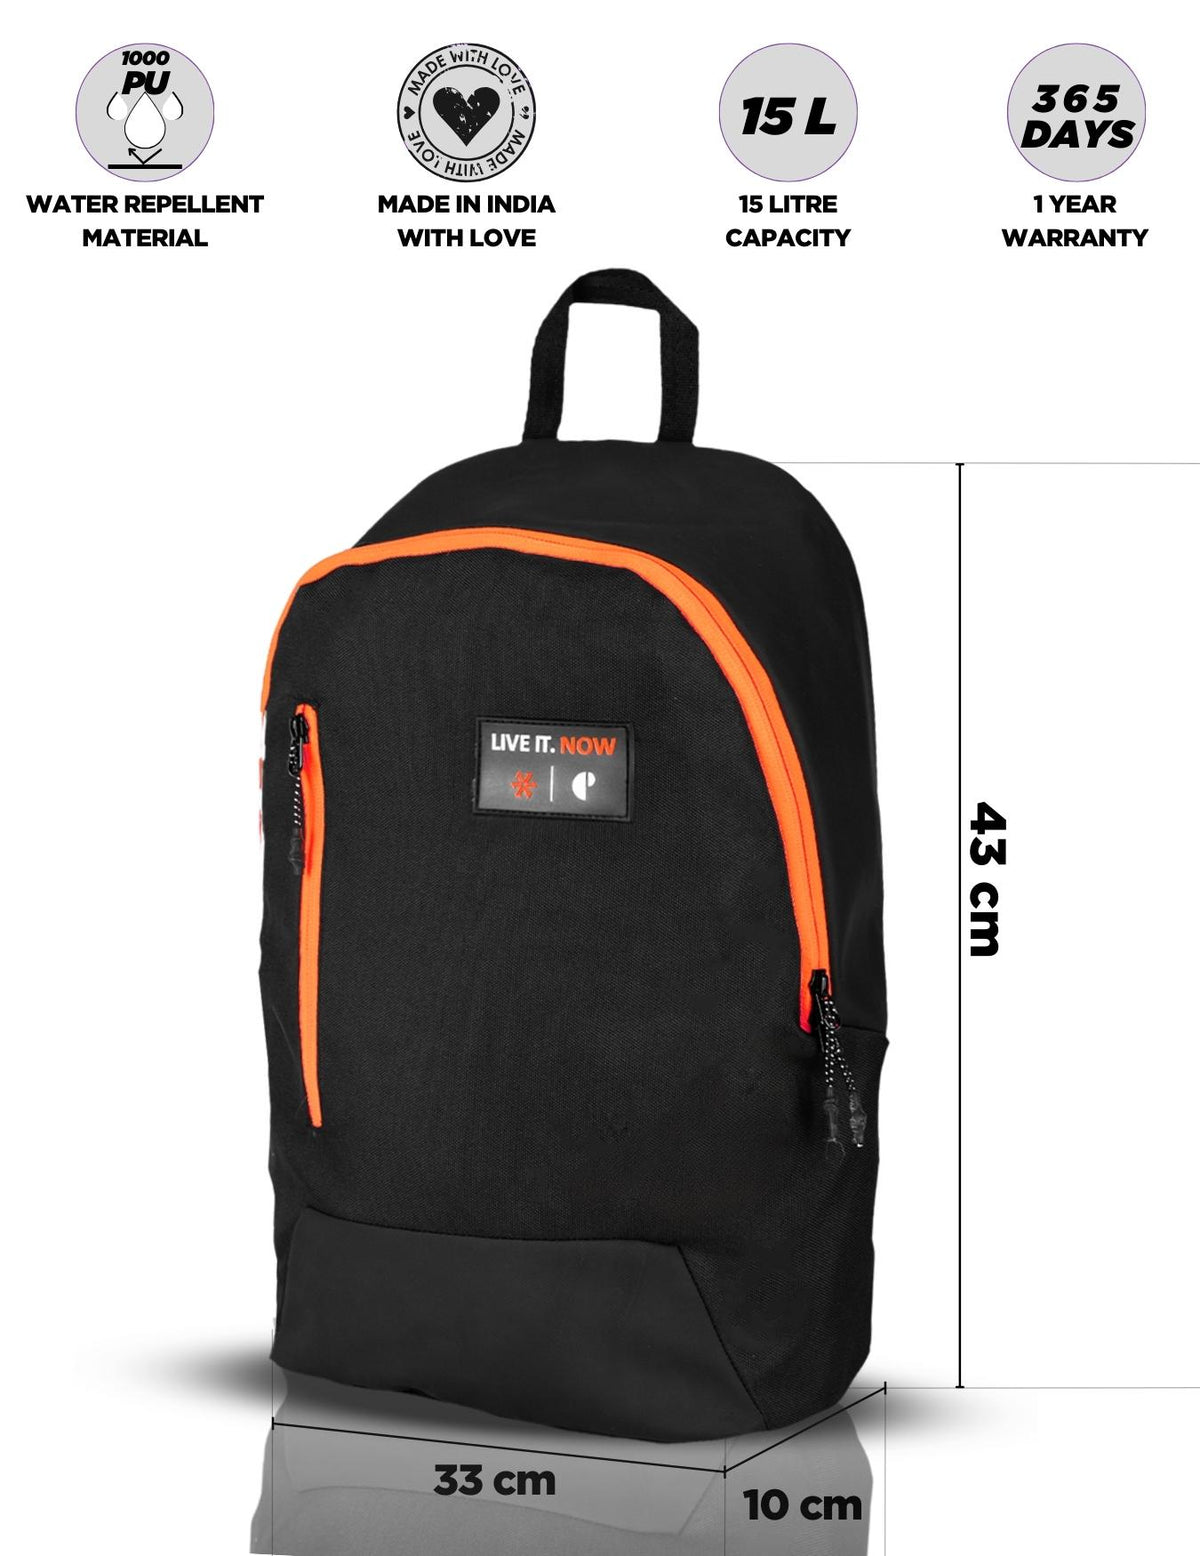 ZoPro DayPacker 15L (Limited Edition)